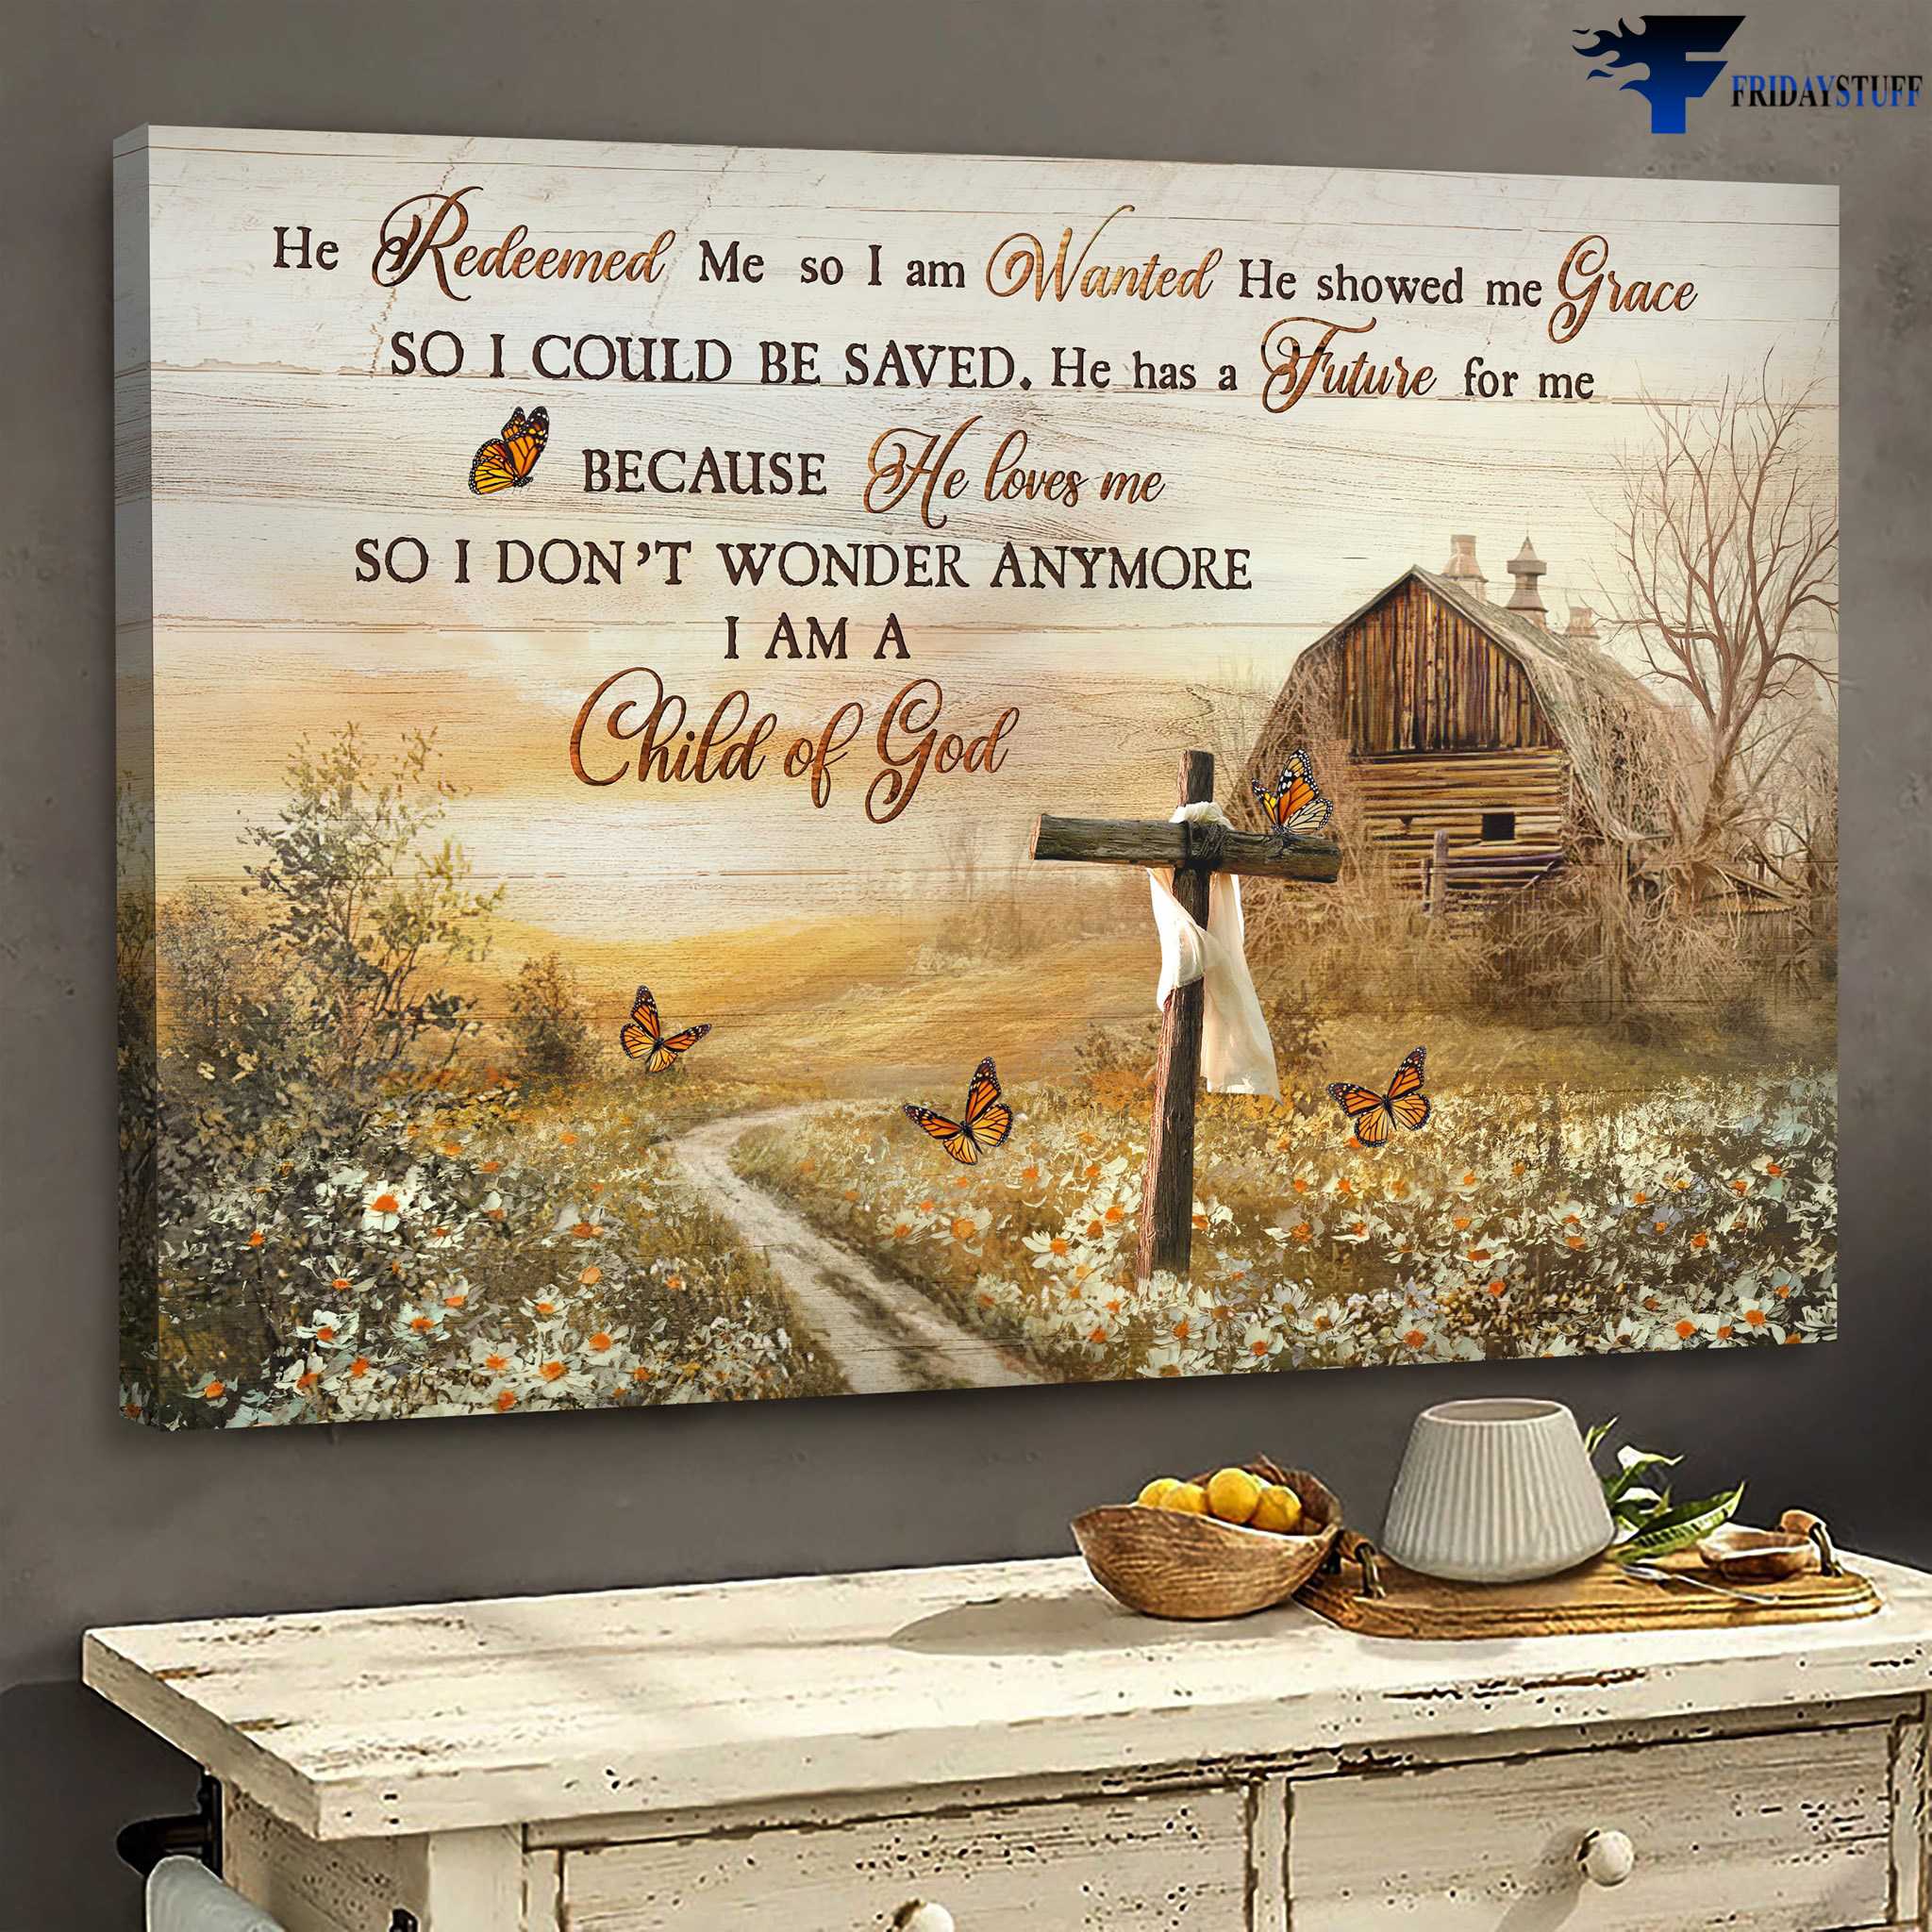 Farmhouse Cross, Butterfly Flower - He Redeemed Me, So I Am Wanted, He Showed Me Grace, So I Could Be Saved, He Has A Future For Me, Because He Love Me, So I Don't Wonder Anymore, I Am A Child Of God